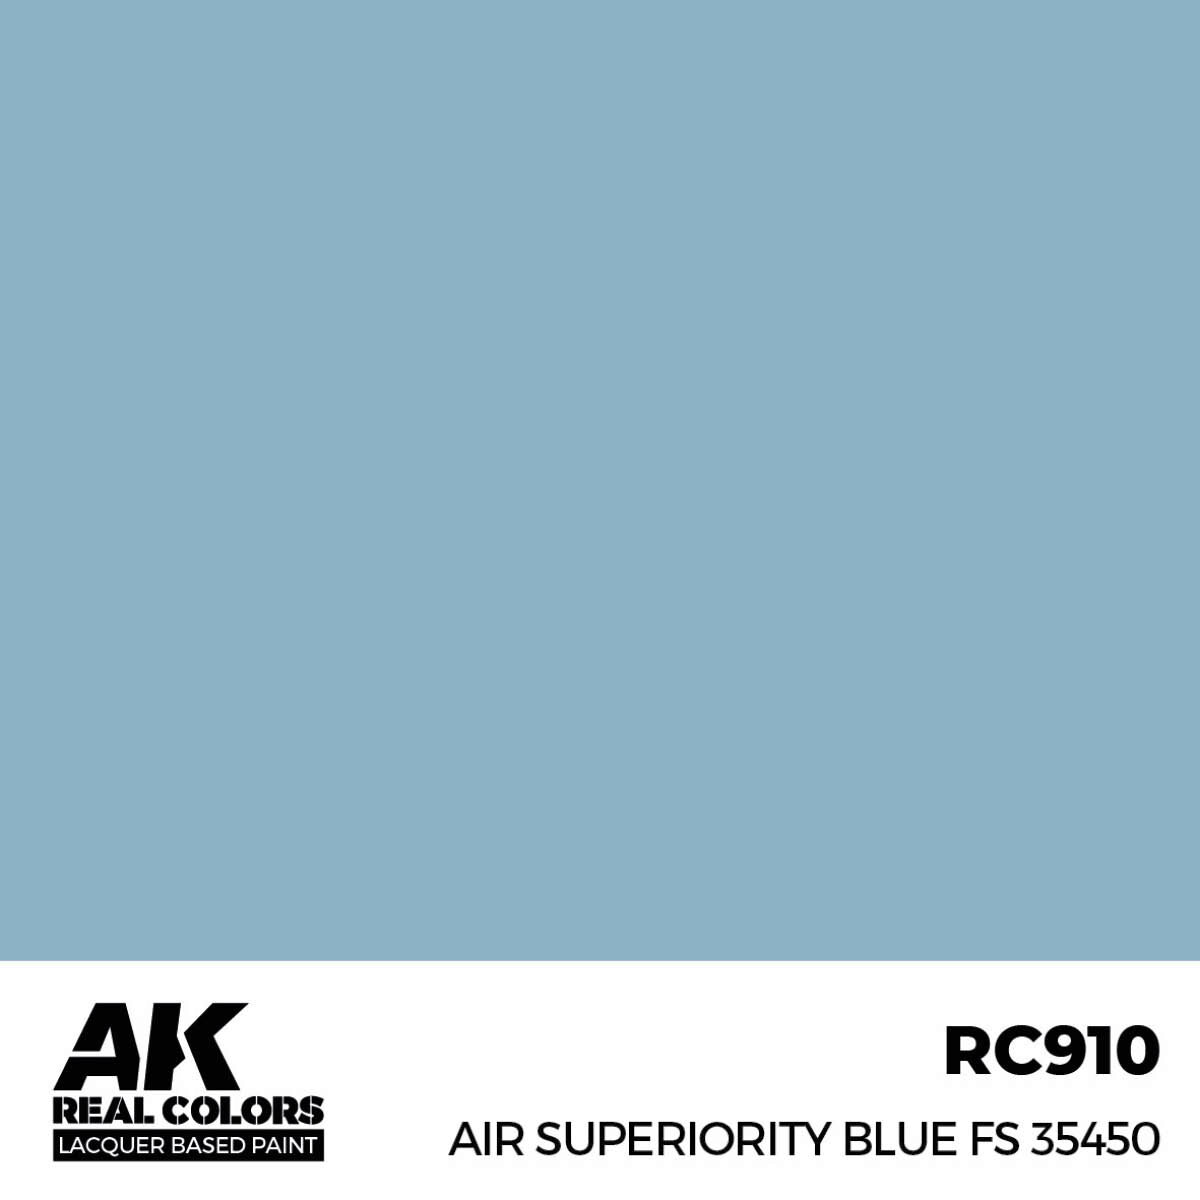 AK RC910 Real Colors Air Superiority Blue FS 35450 17 ml.